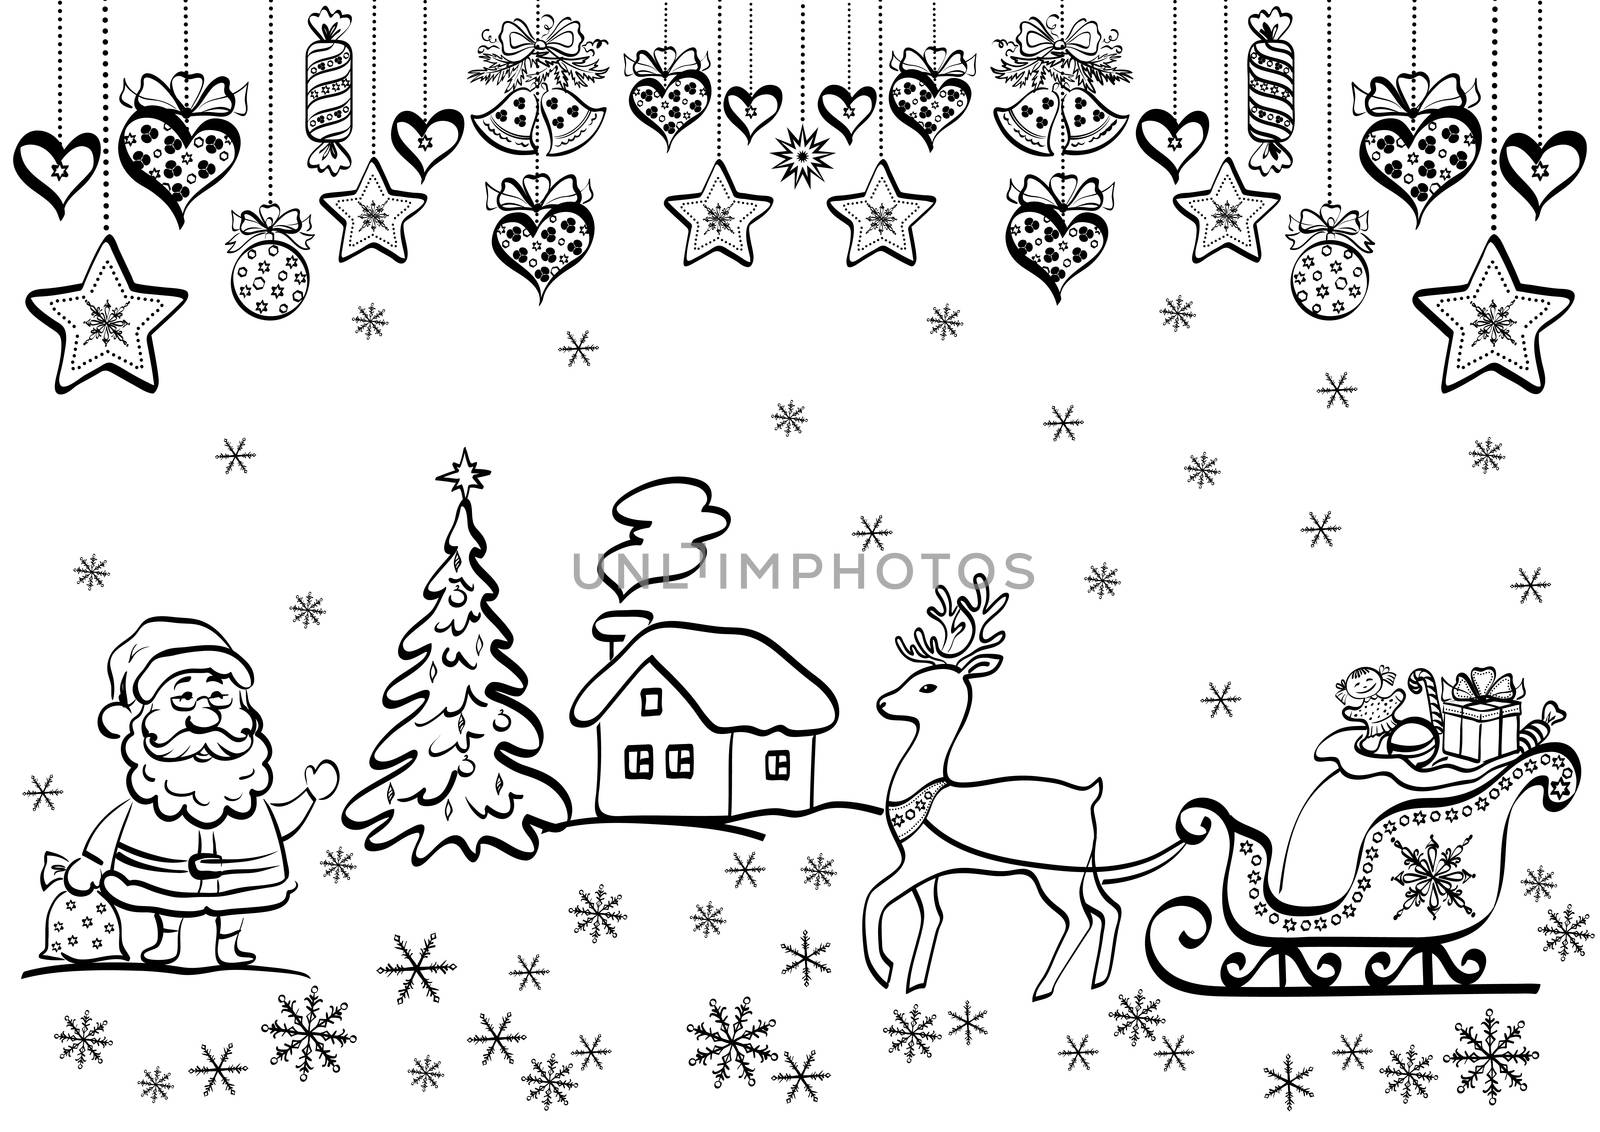 Christmas background with black contour cartoon Santa Claus and holiday decorations.